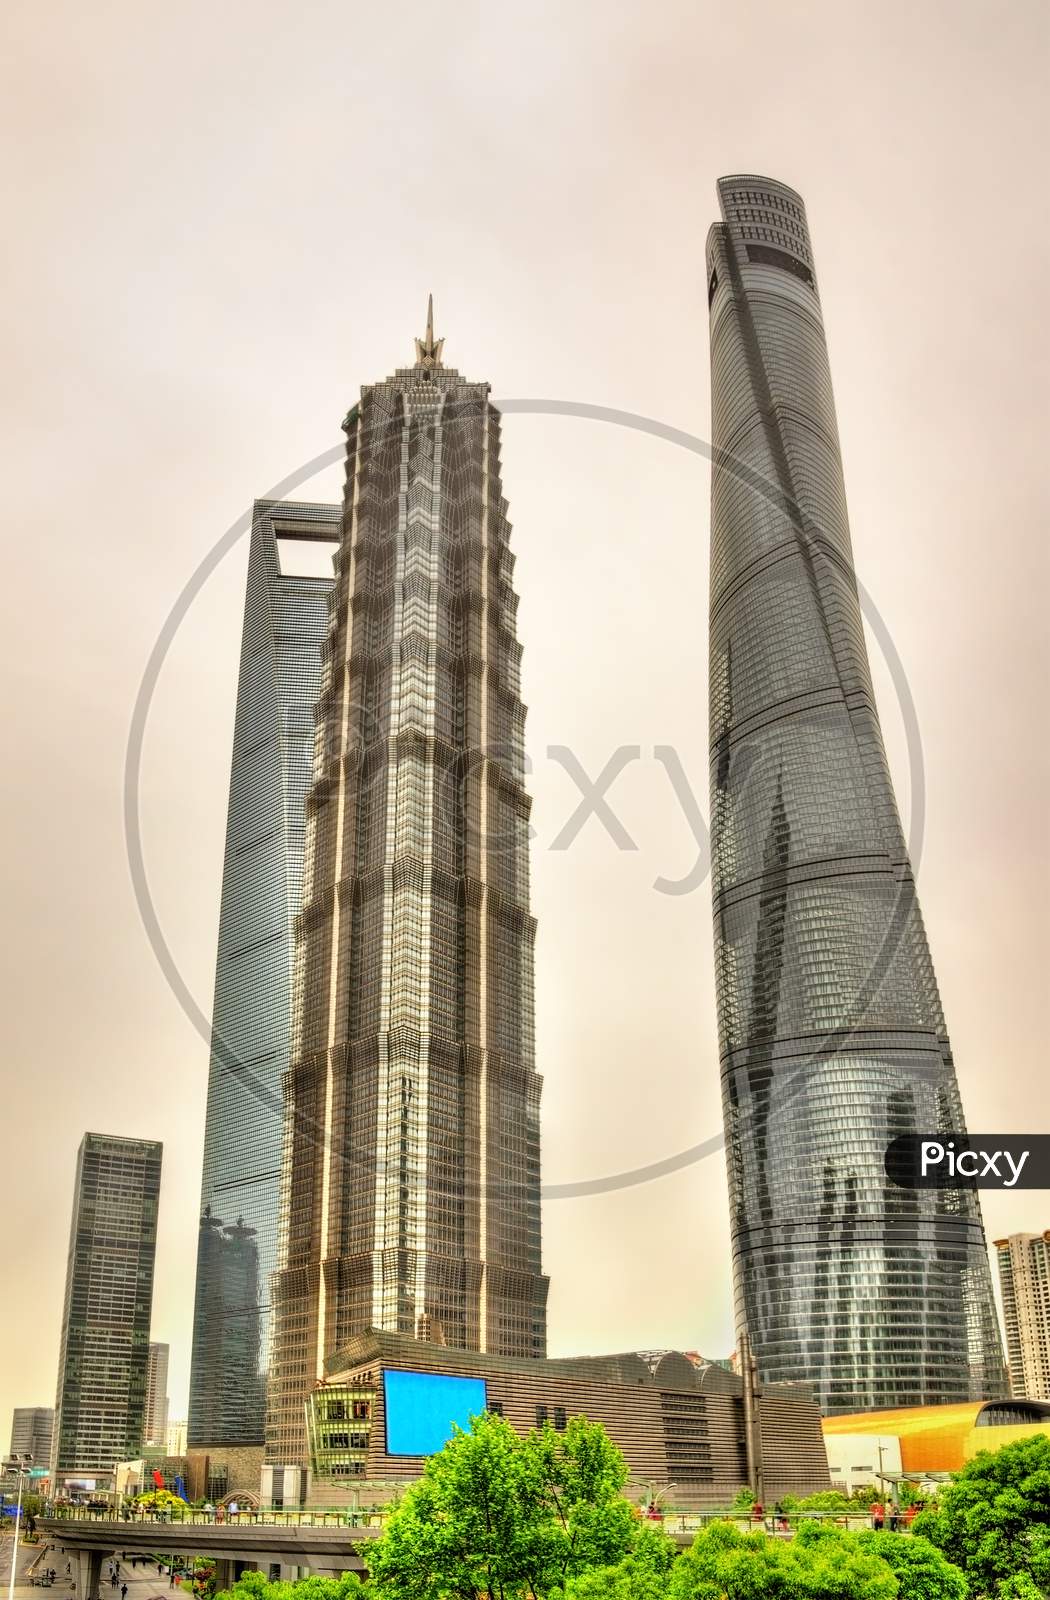 Shanghai Skyscrapers At Lujiazui Financial District